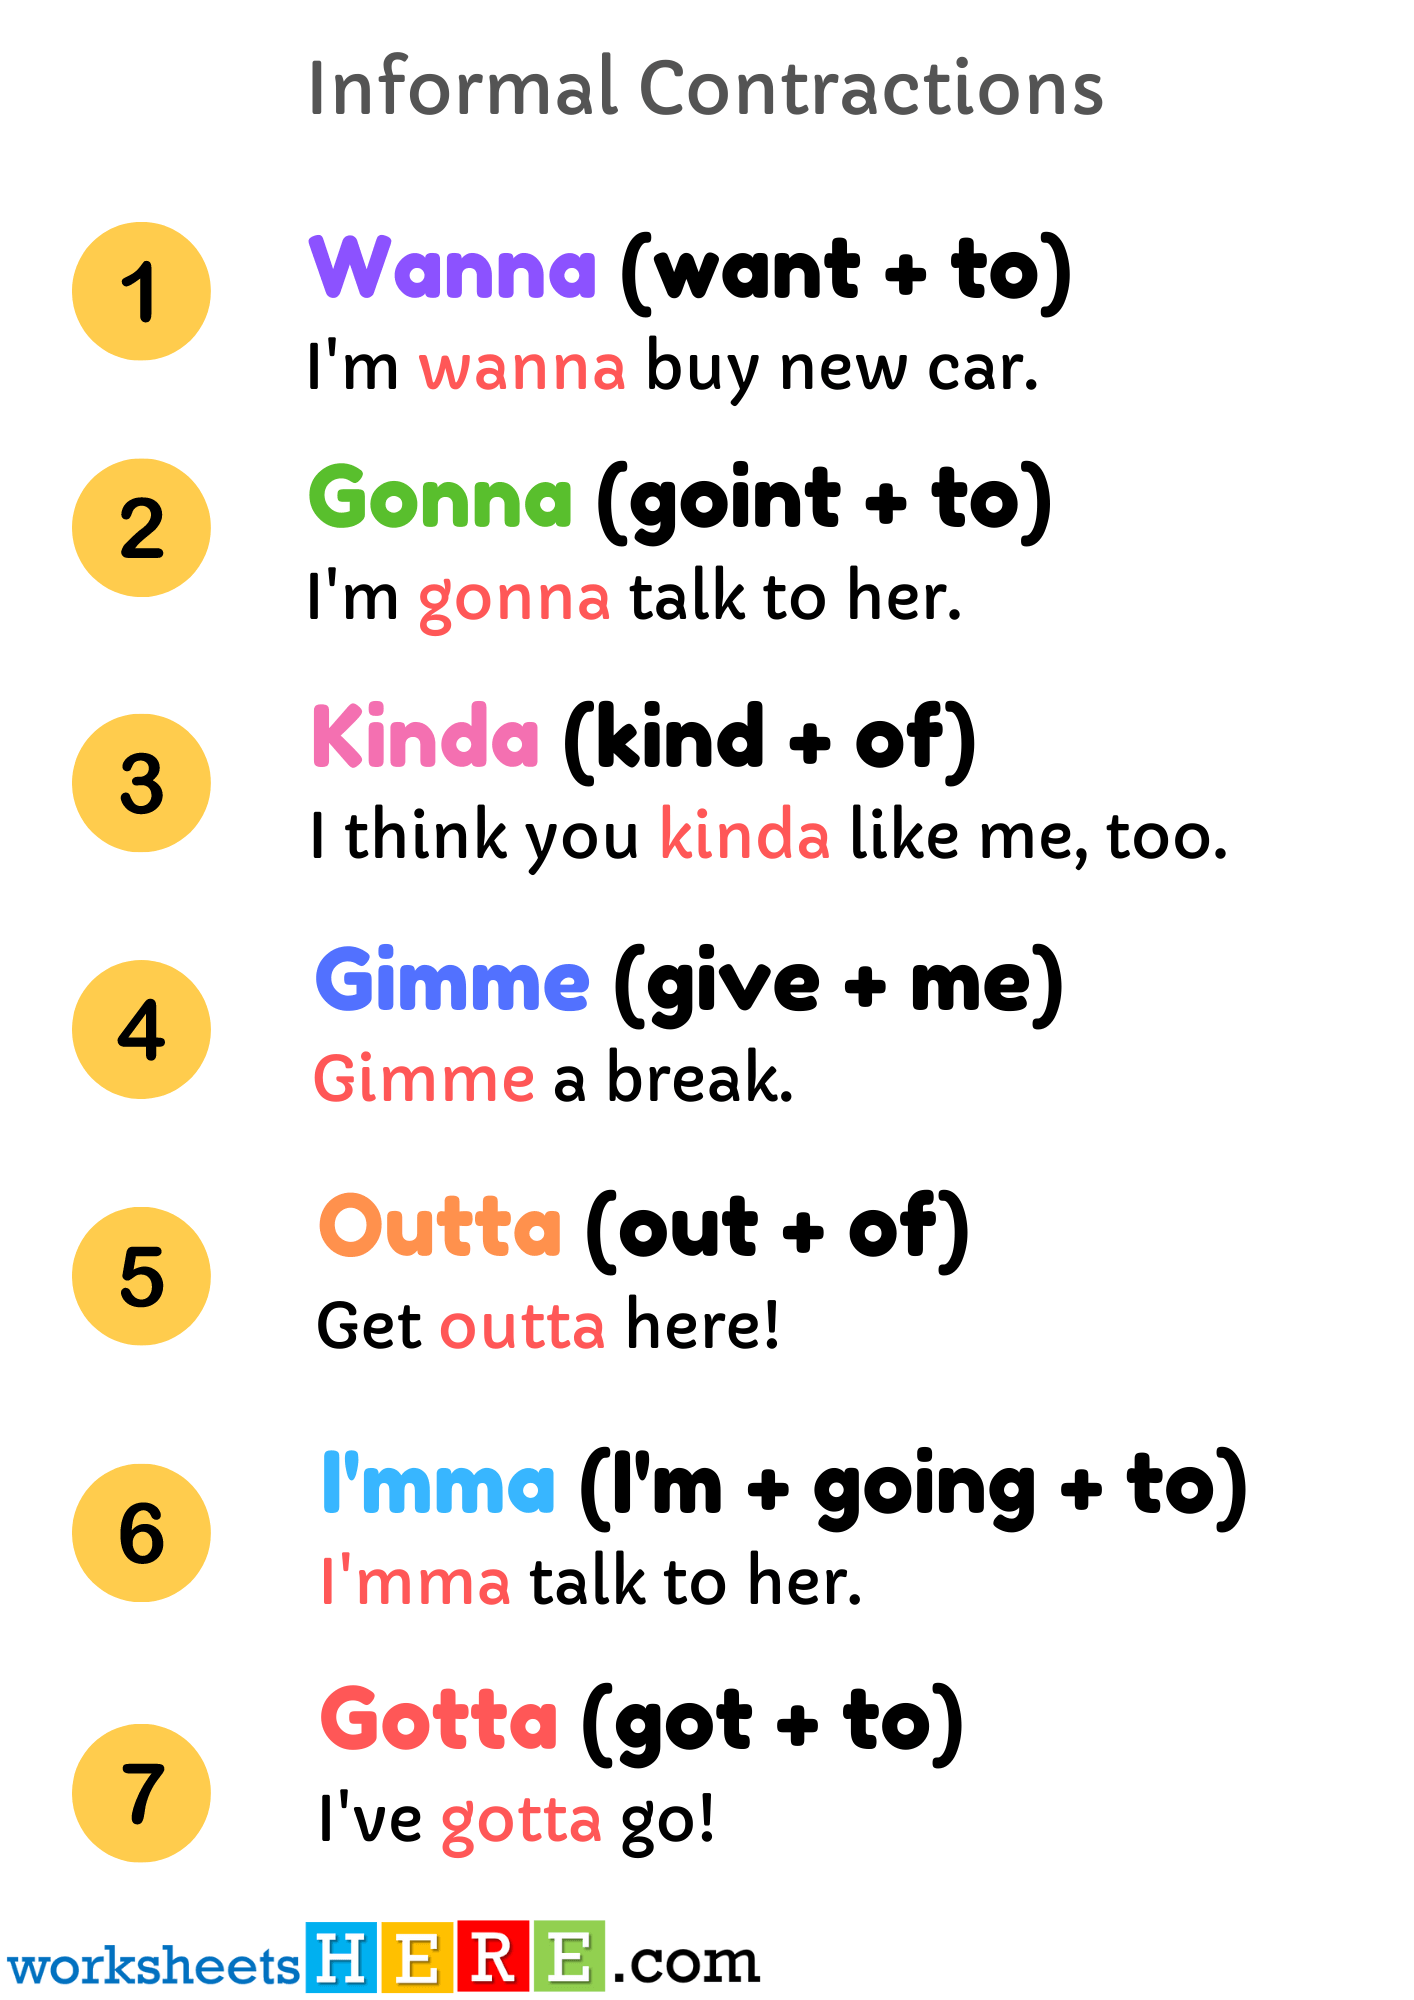 Informal Contractions Examples and Sentences PDF Worksheet For Students